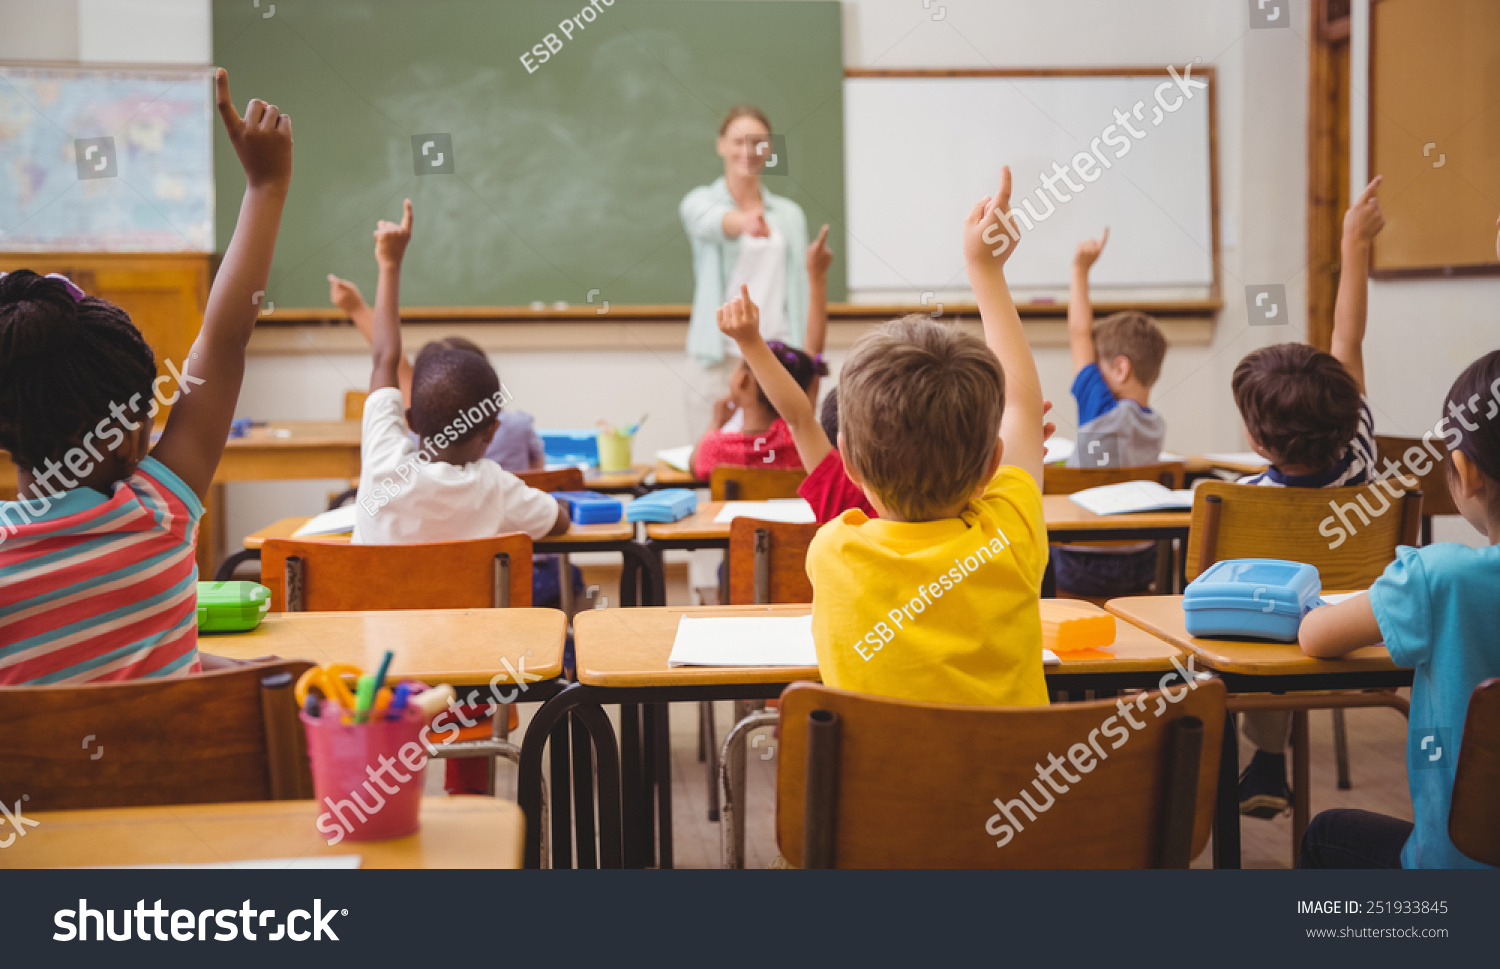 Pupils raising their hands during class at the elementary school #251933845